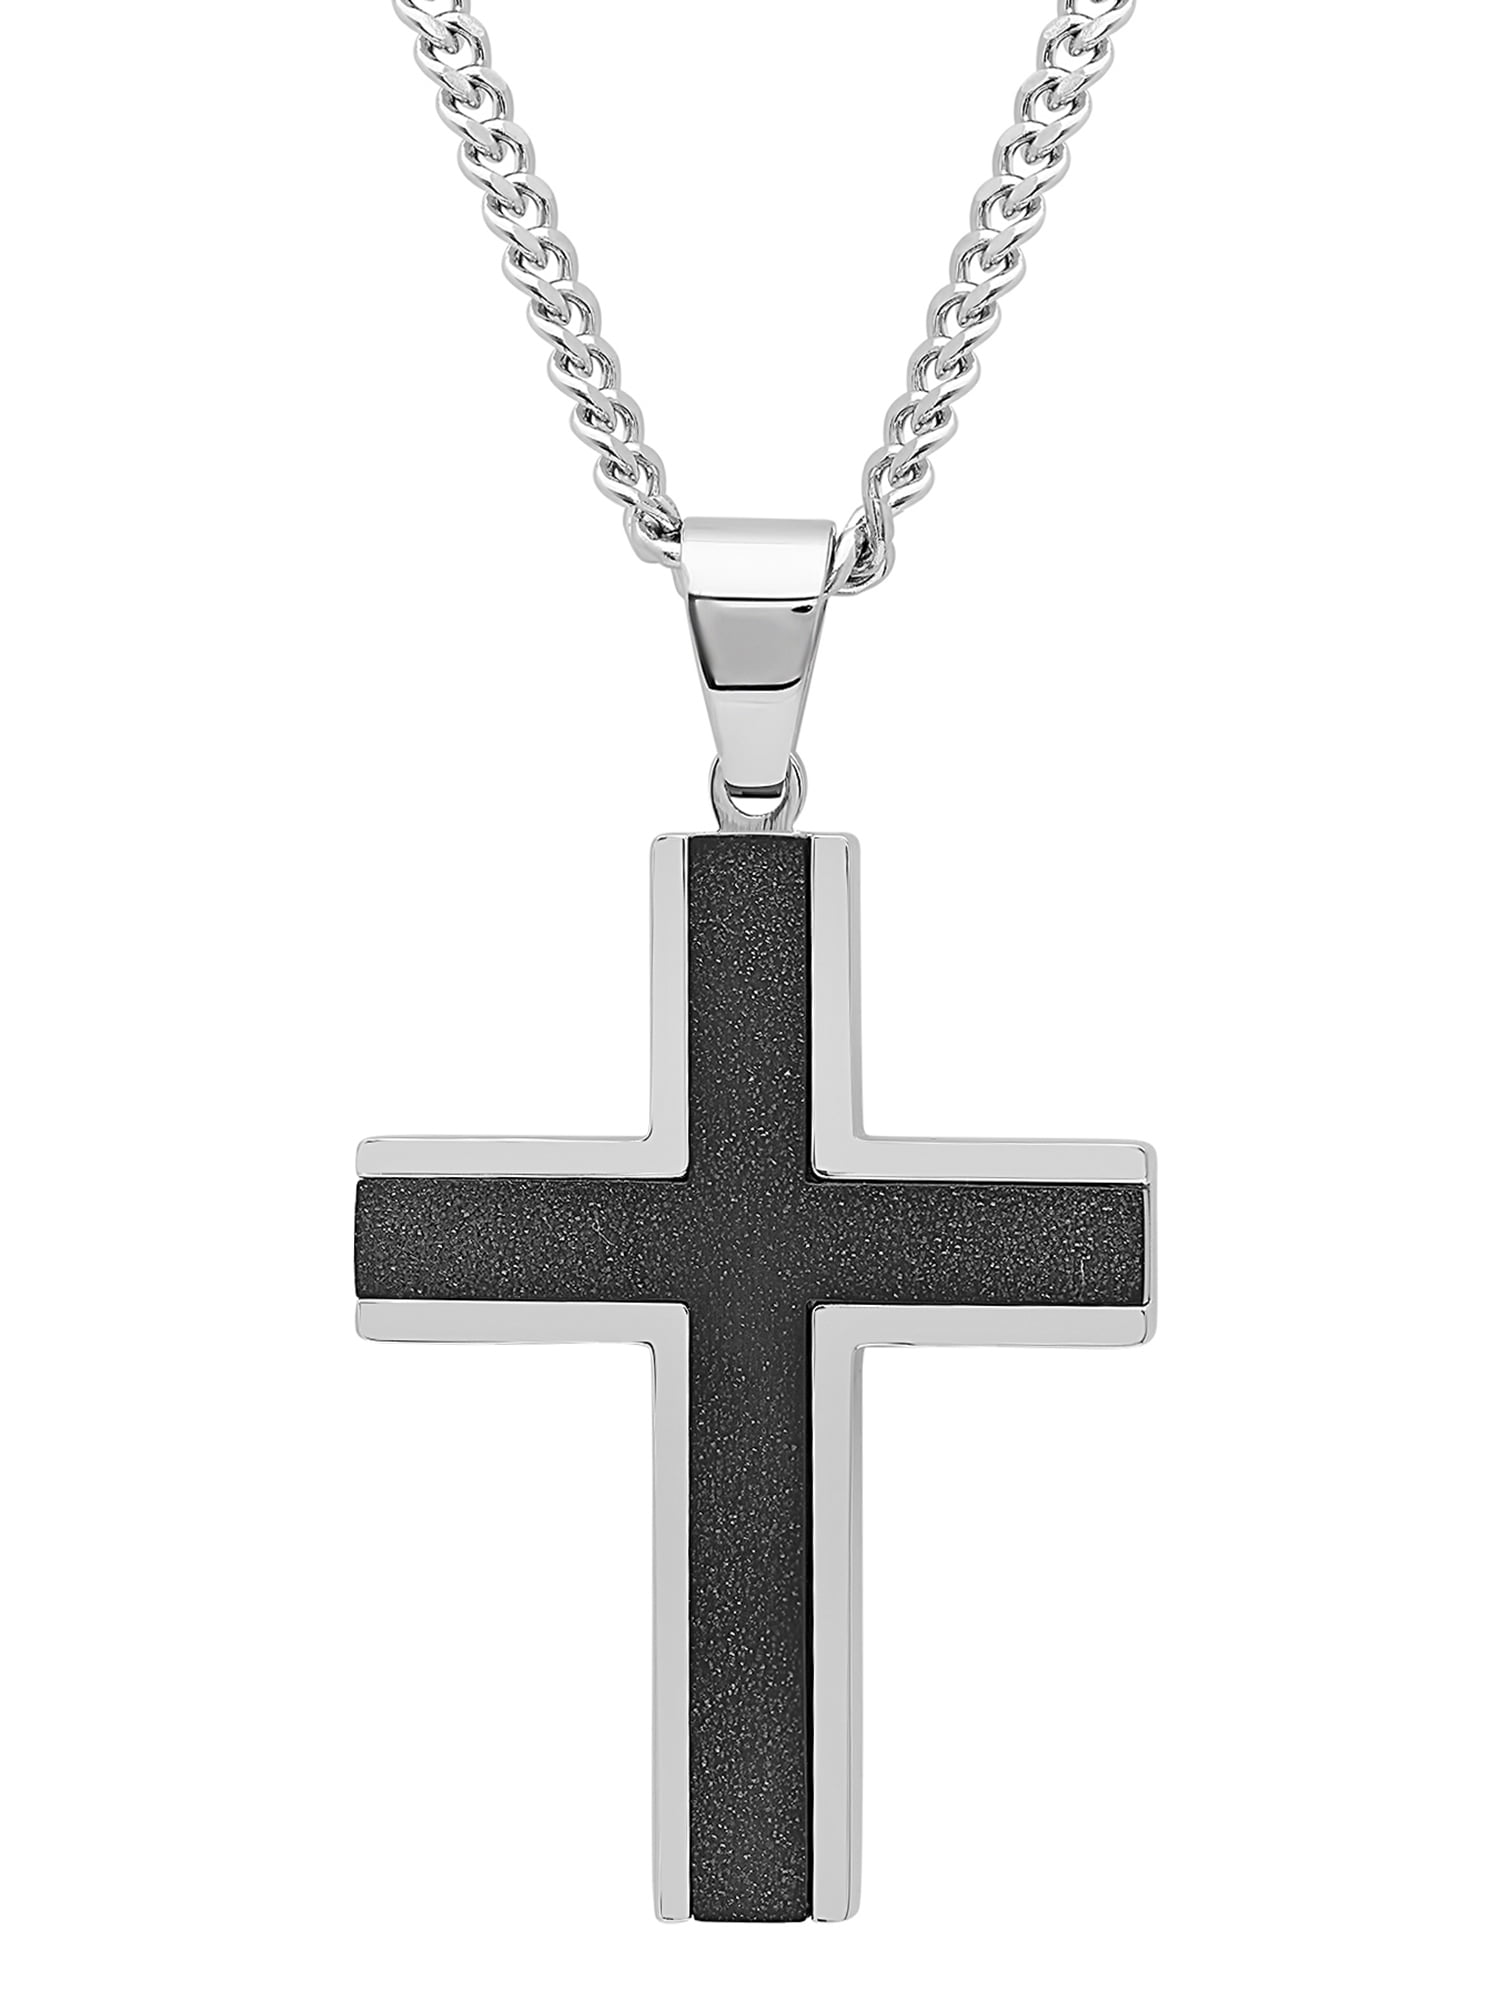 Believe by Brilliance Men's Stainless Steel Textured Cross Pendant Necklace